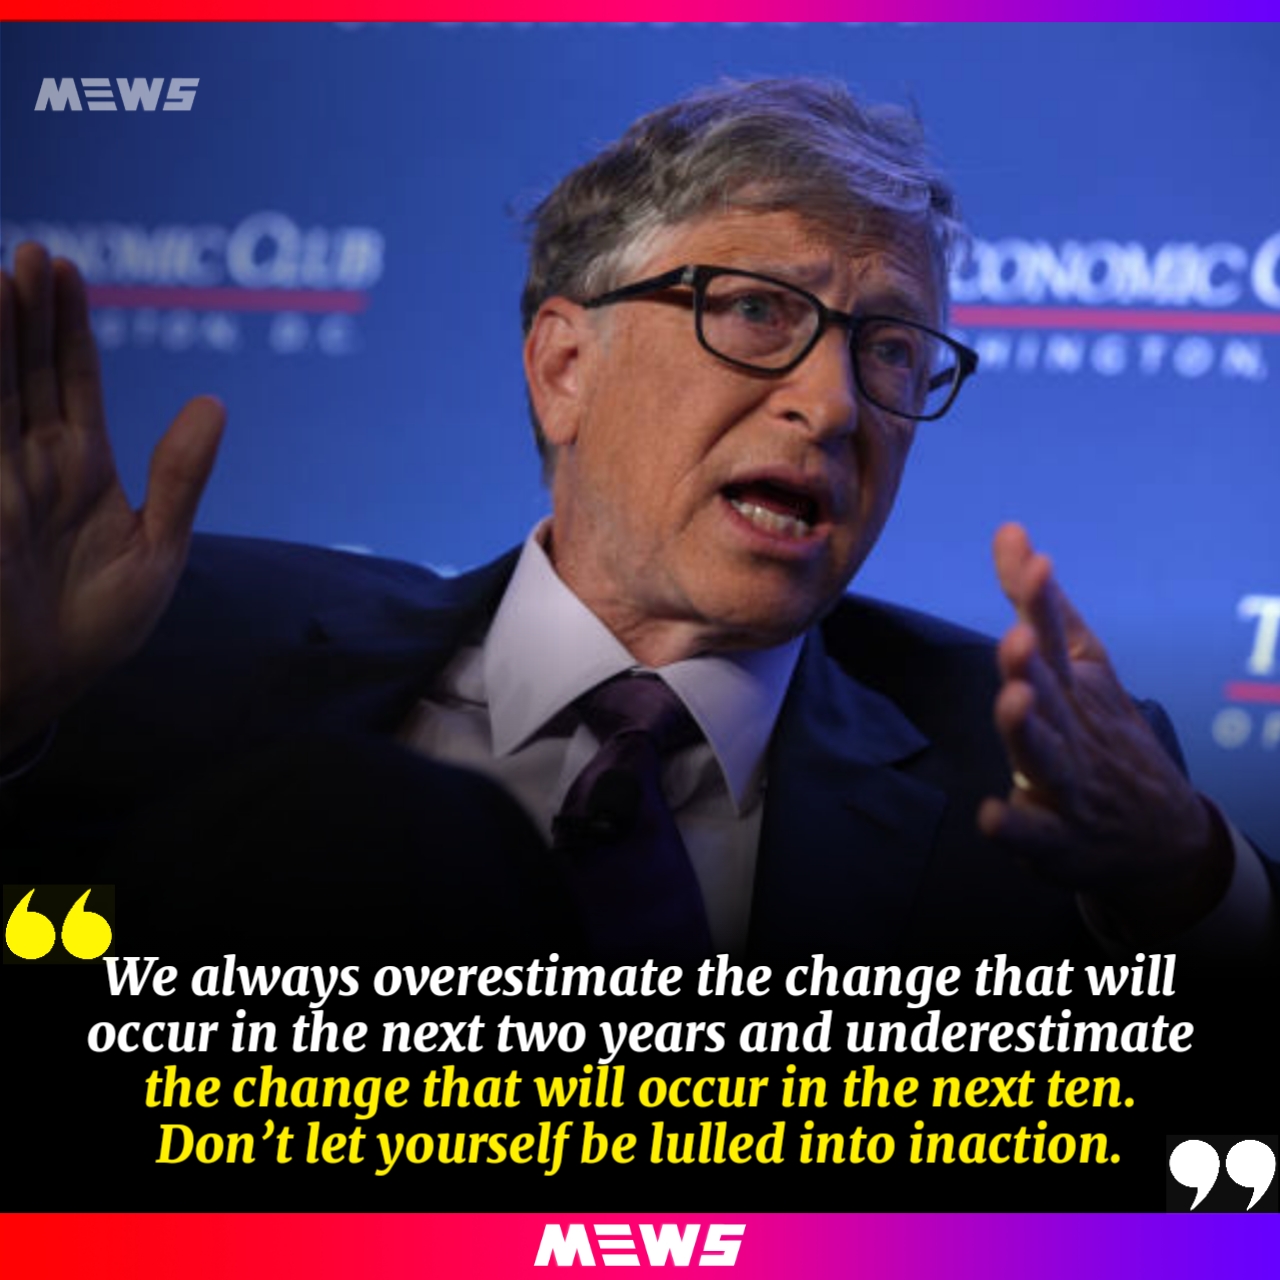 motivational quotes by Bill Gates